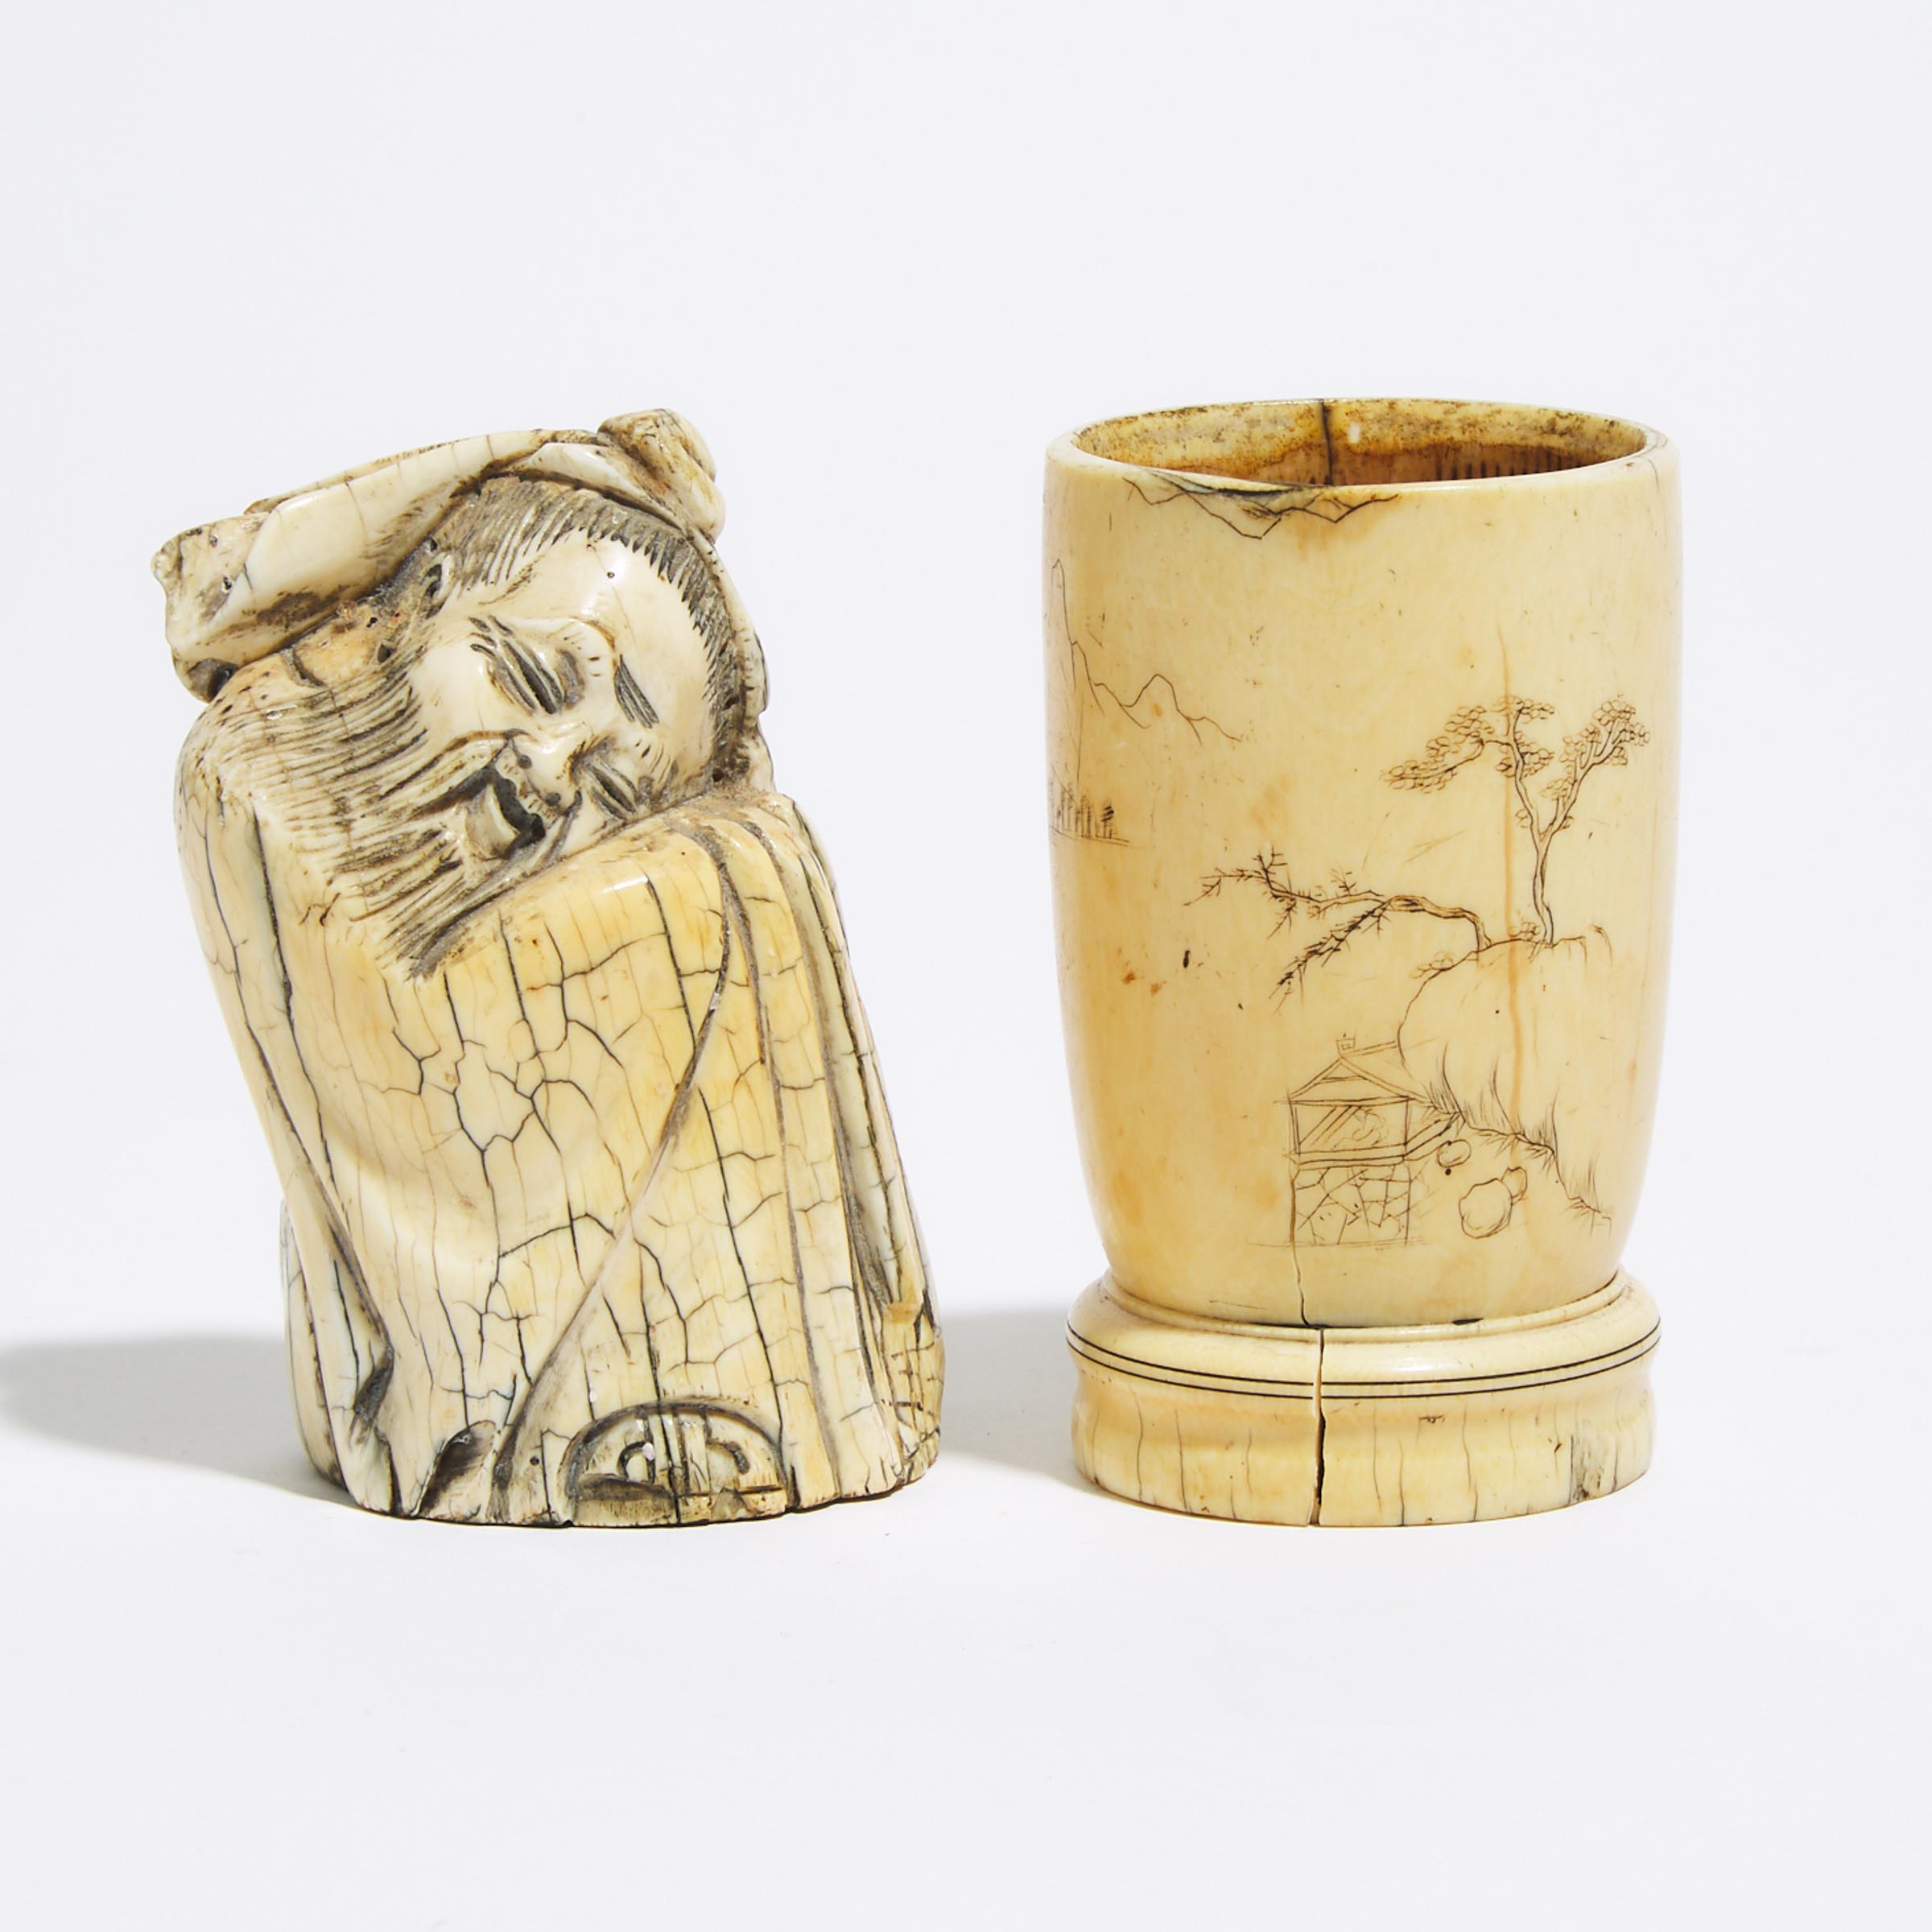 An Ivory Cup with Landscape and Calligraphy, Together With a Figure of Li Bai, 18th/19th Century